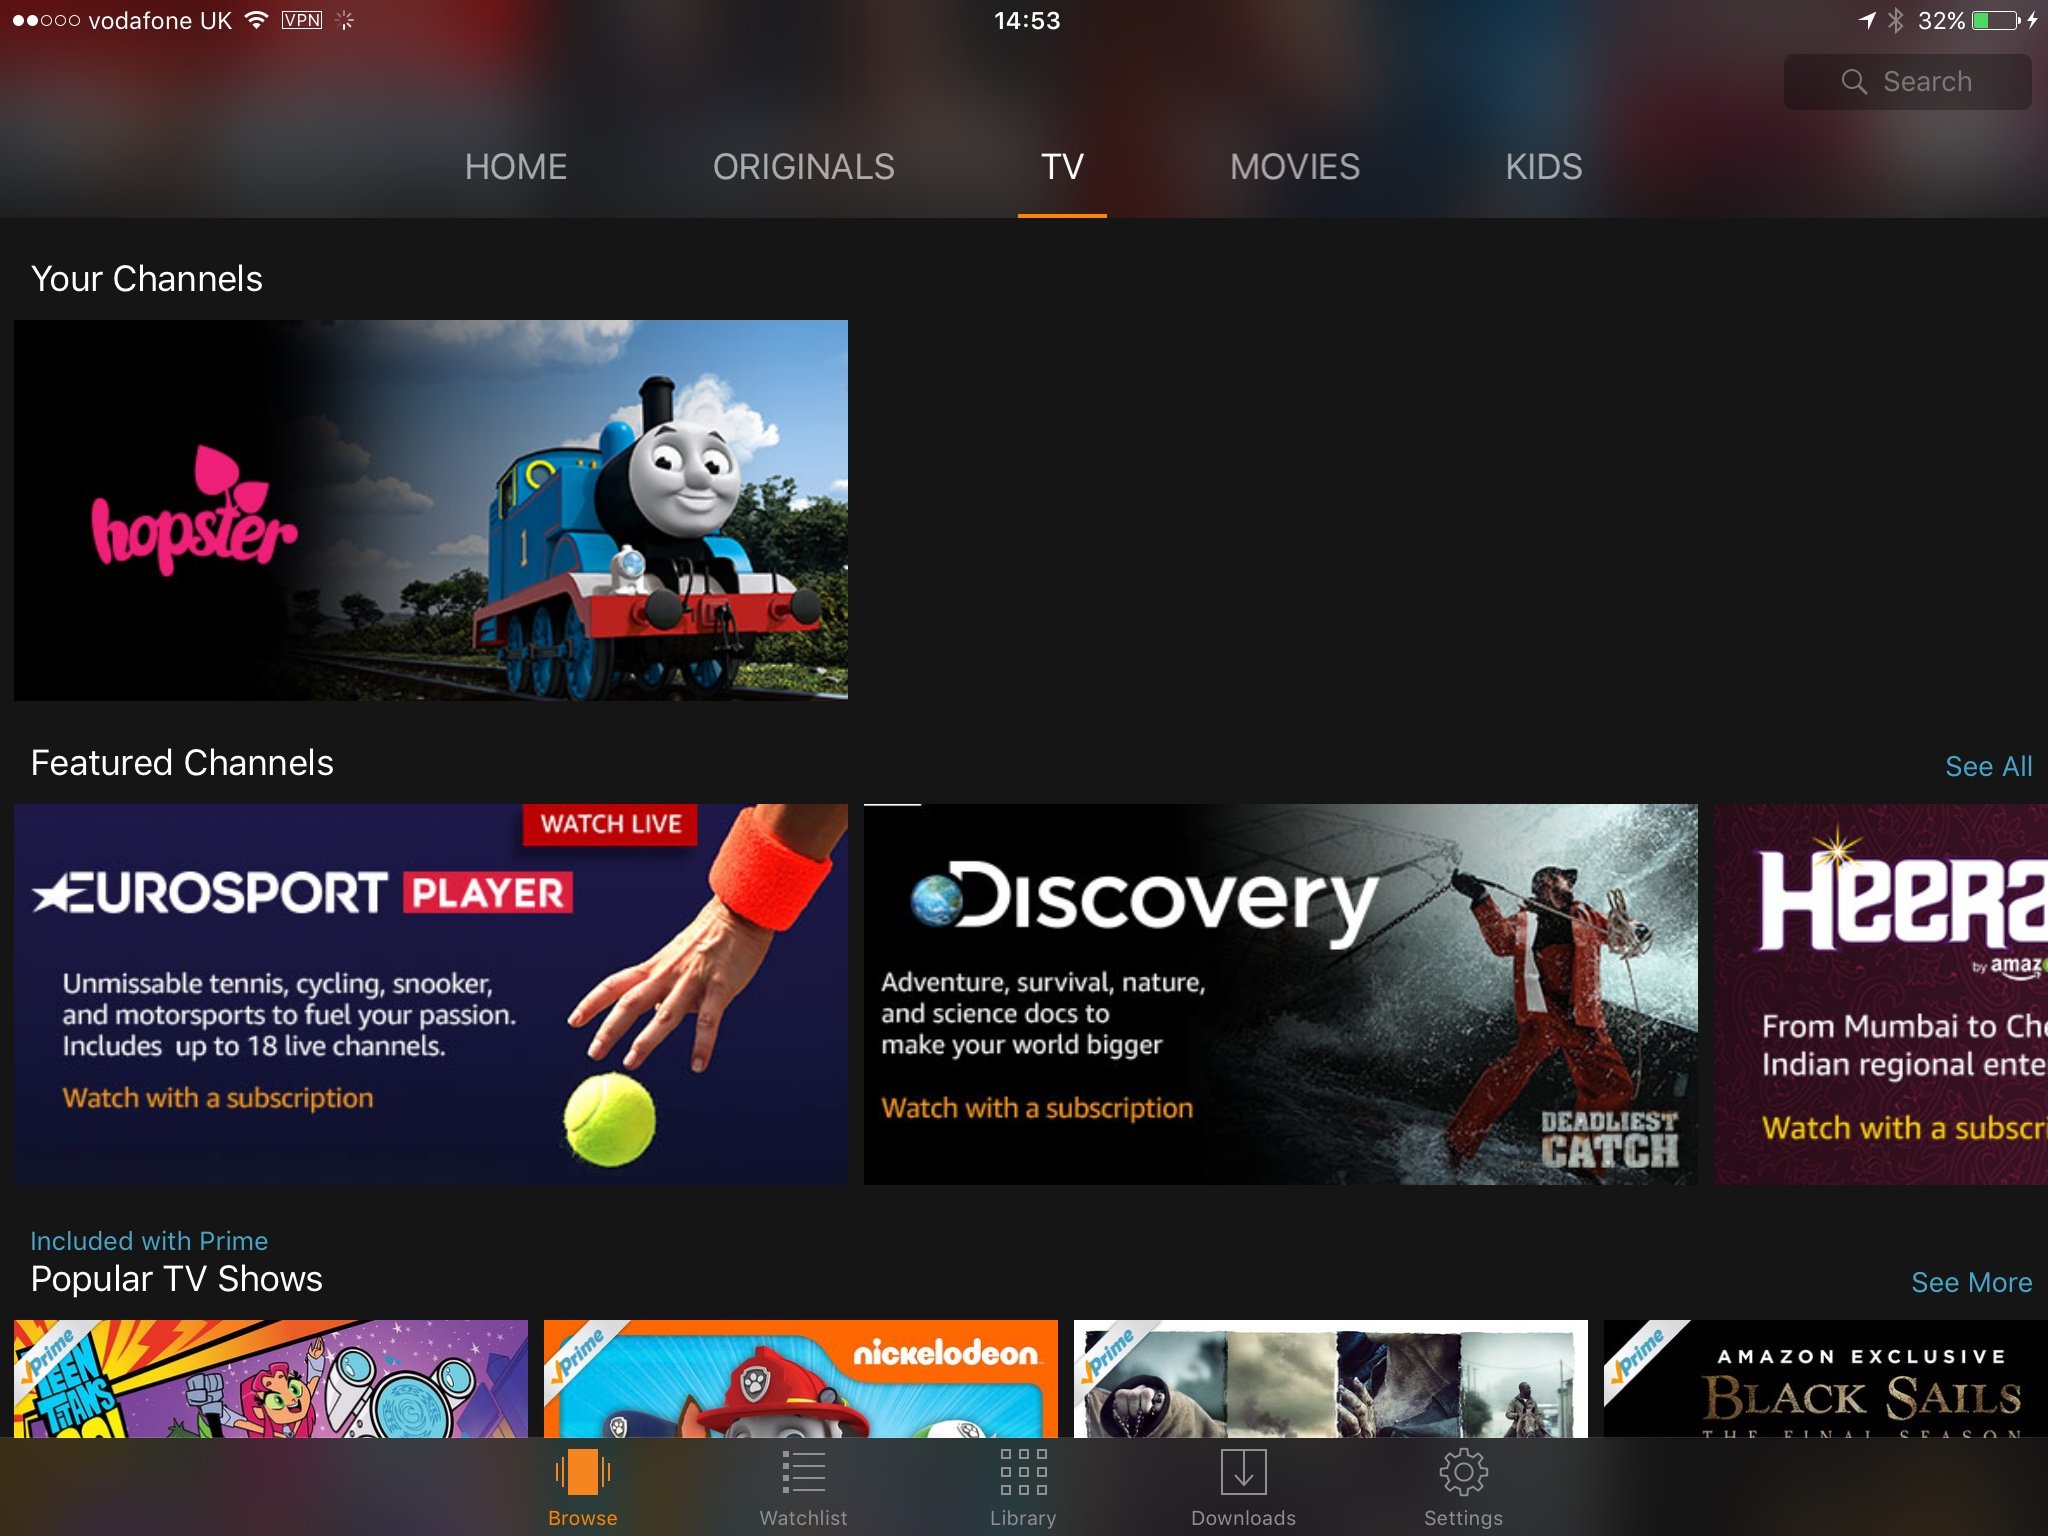 amazon-channels-now-available-to-prime-subscribers-in-uk-imore